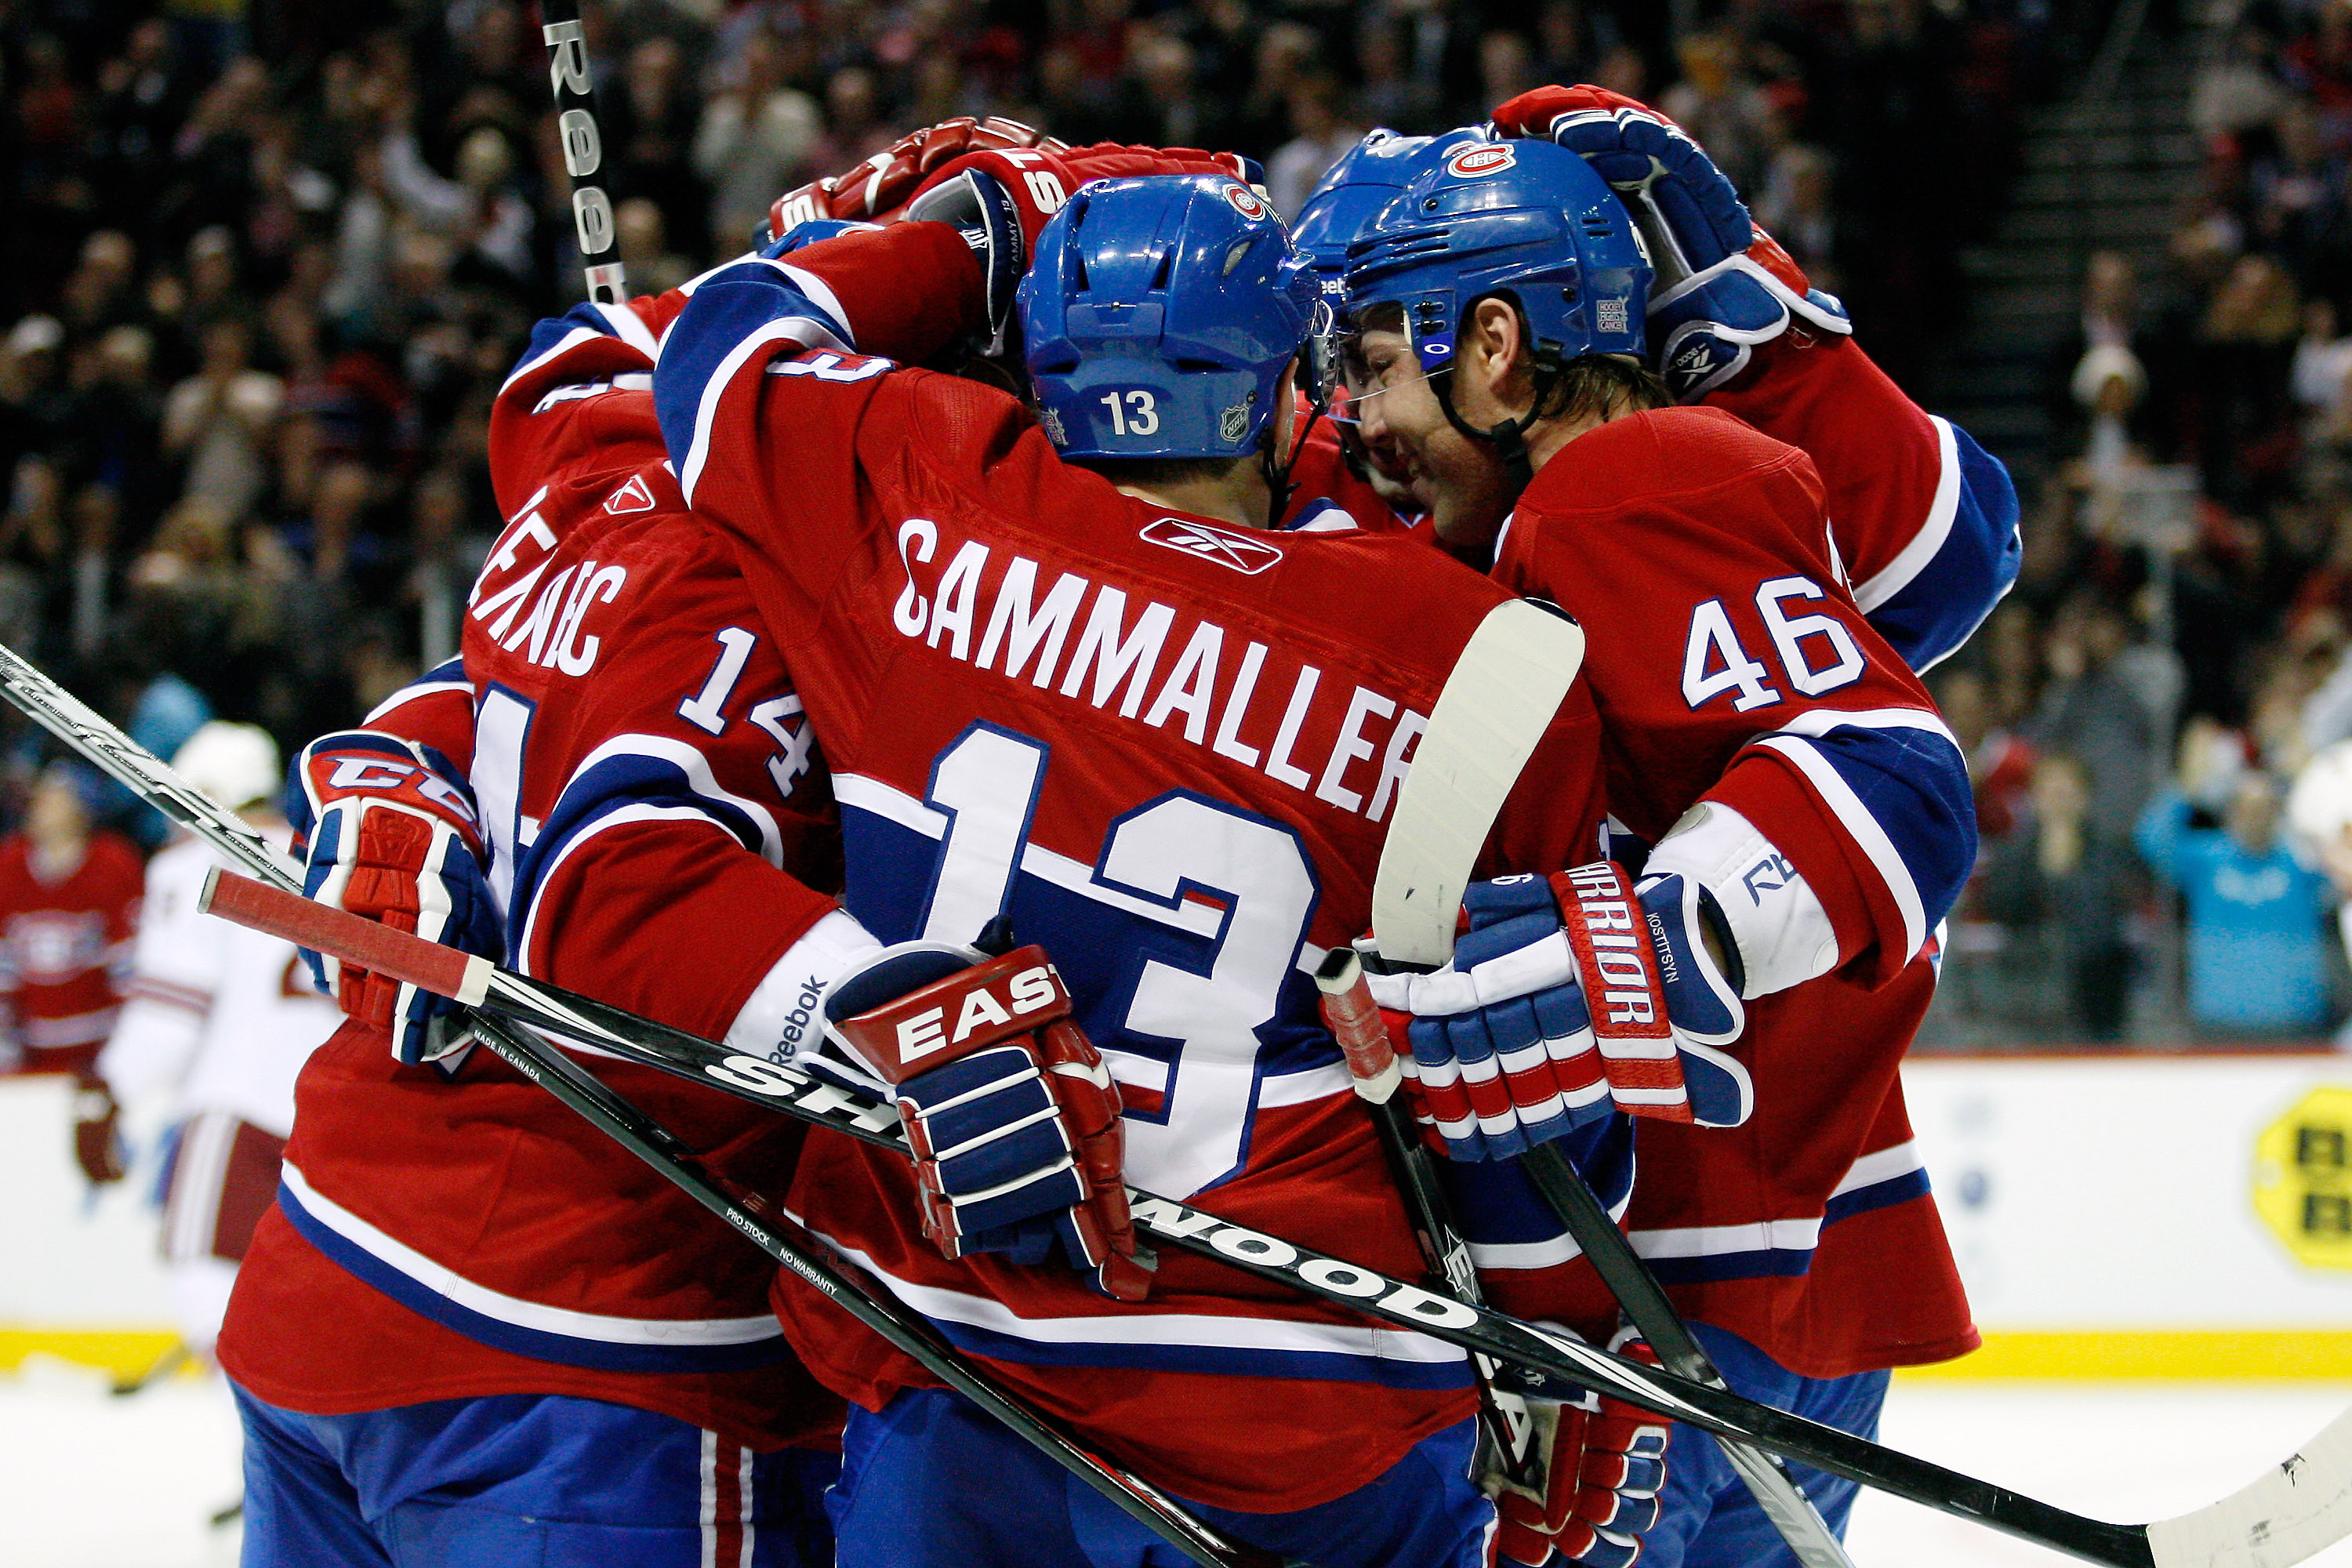 MONTREAL, QC - OCTOBER 25:  Tomas Plekanec #14 of the Montreal Canadiens celebrates his second period goal with team mates during the NHL game against the Phoenix Coyotes at the Bell Centre on October 25, 2010 in Montreal, Quebec, Canada.  The Canadiens d